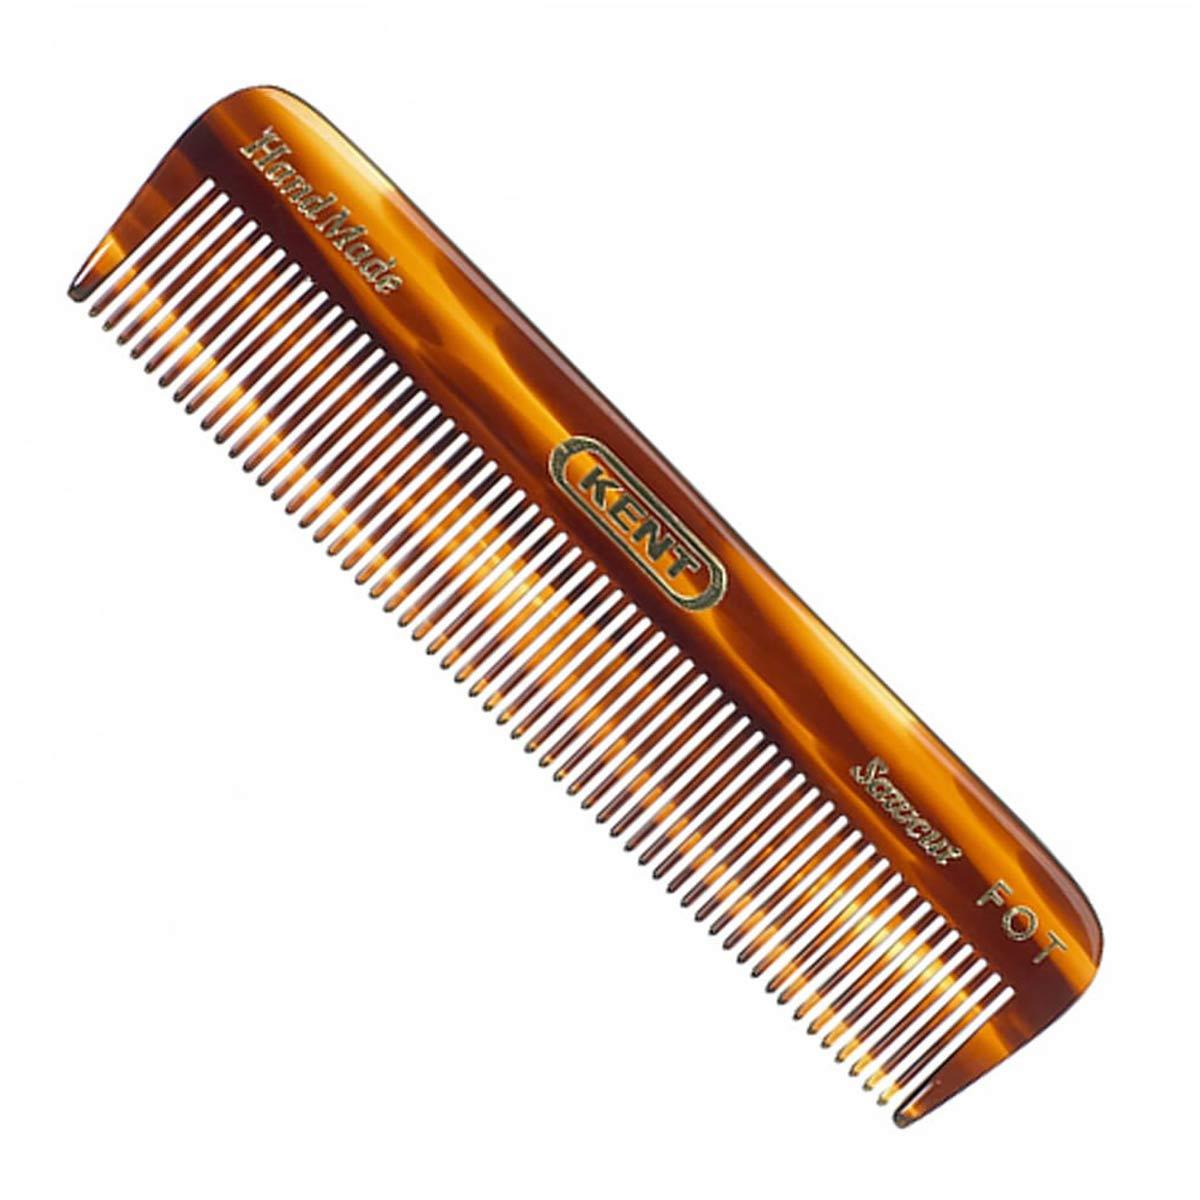 Primary image of Small Men's Pocket Comb - All Fine FOT